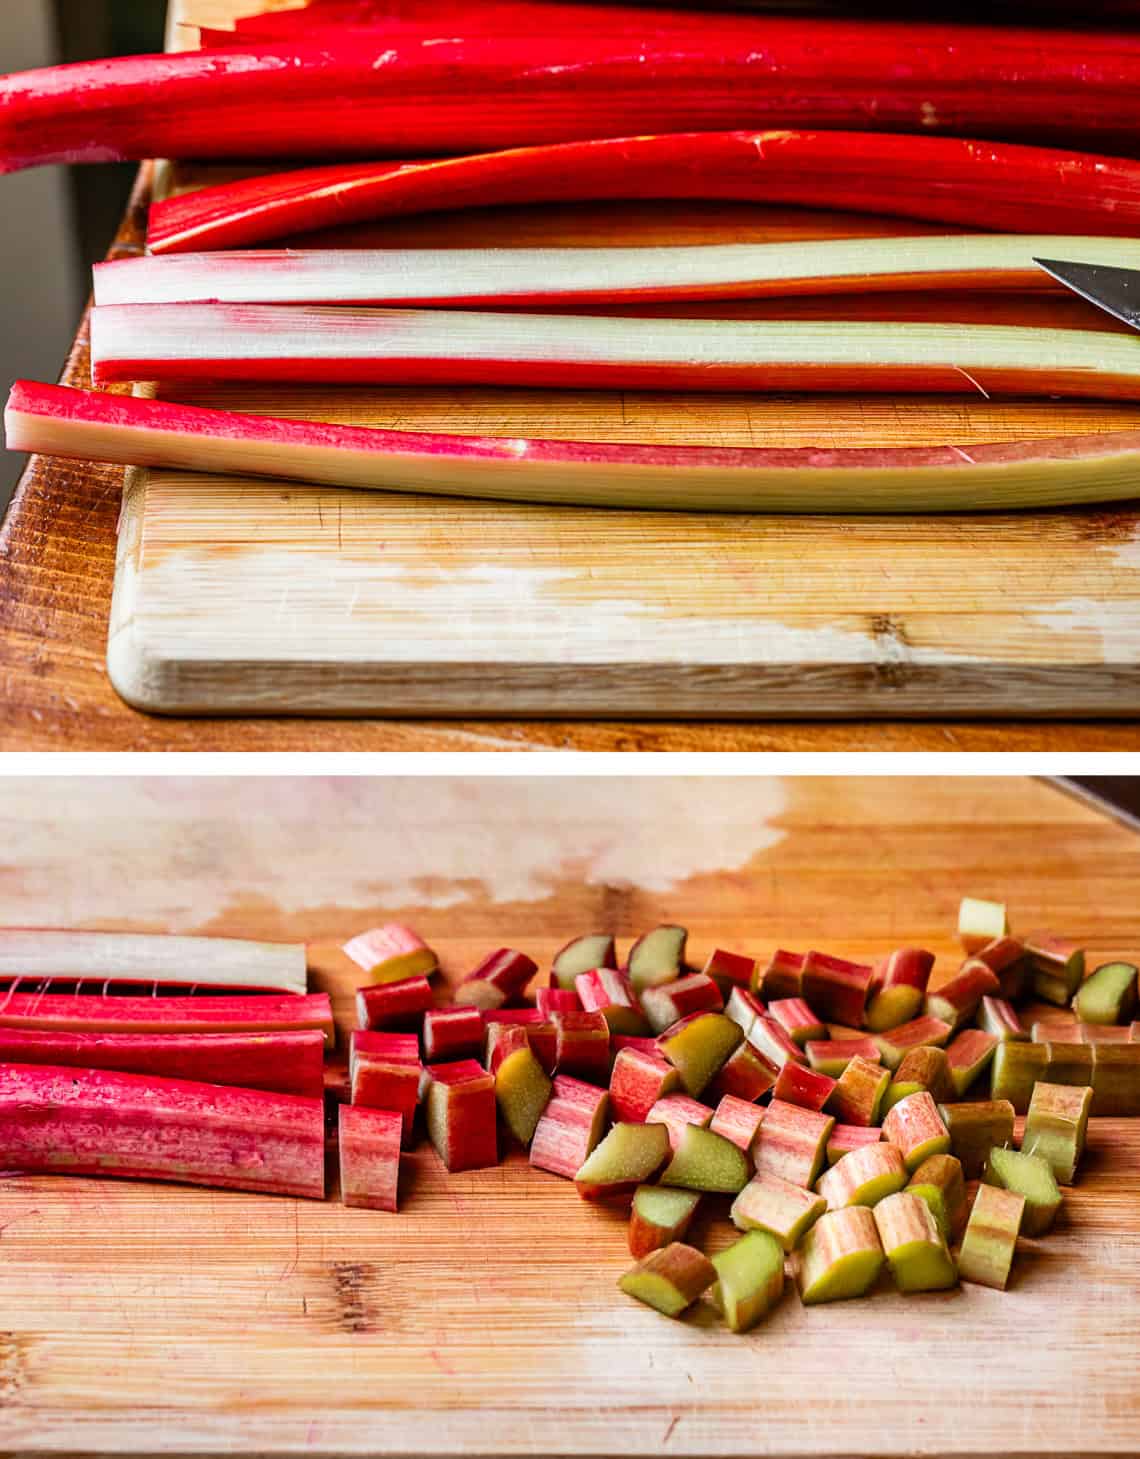 top pic: several stalks of rhubarb sliced lengthwise, bottom: the sliced stalks being cut perpendicular into cubes.